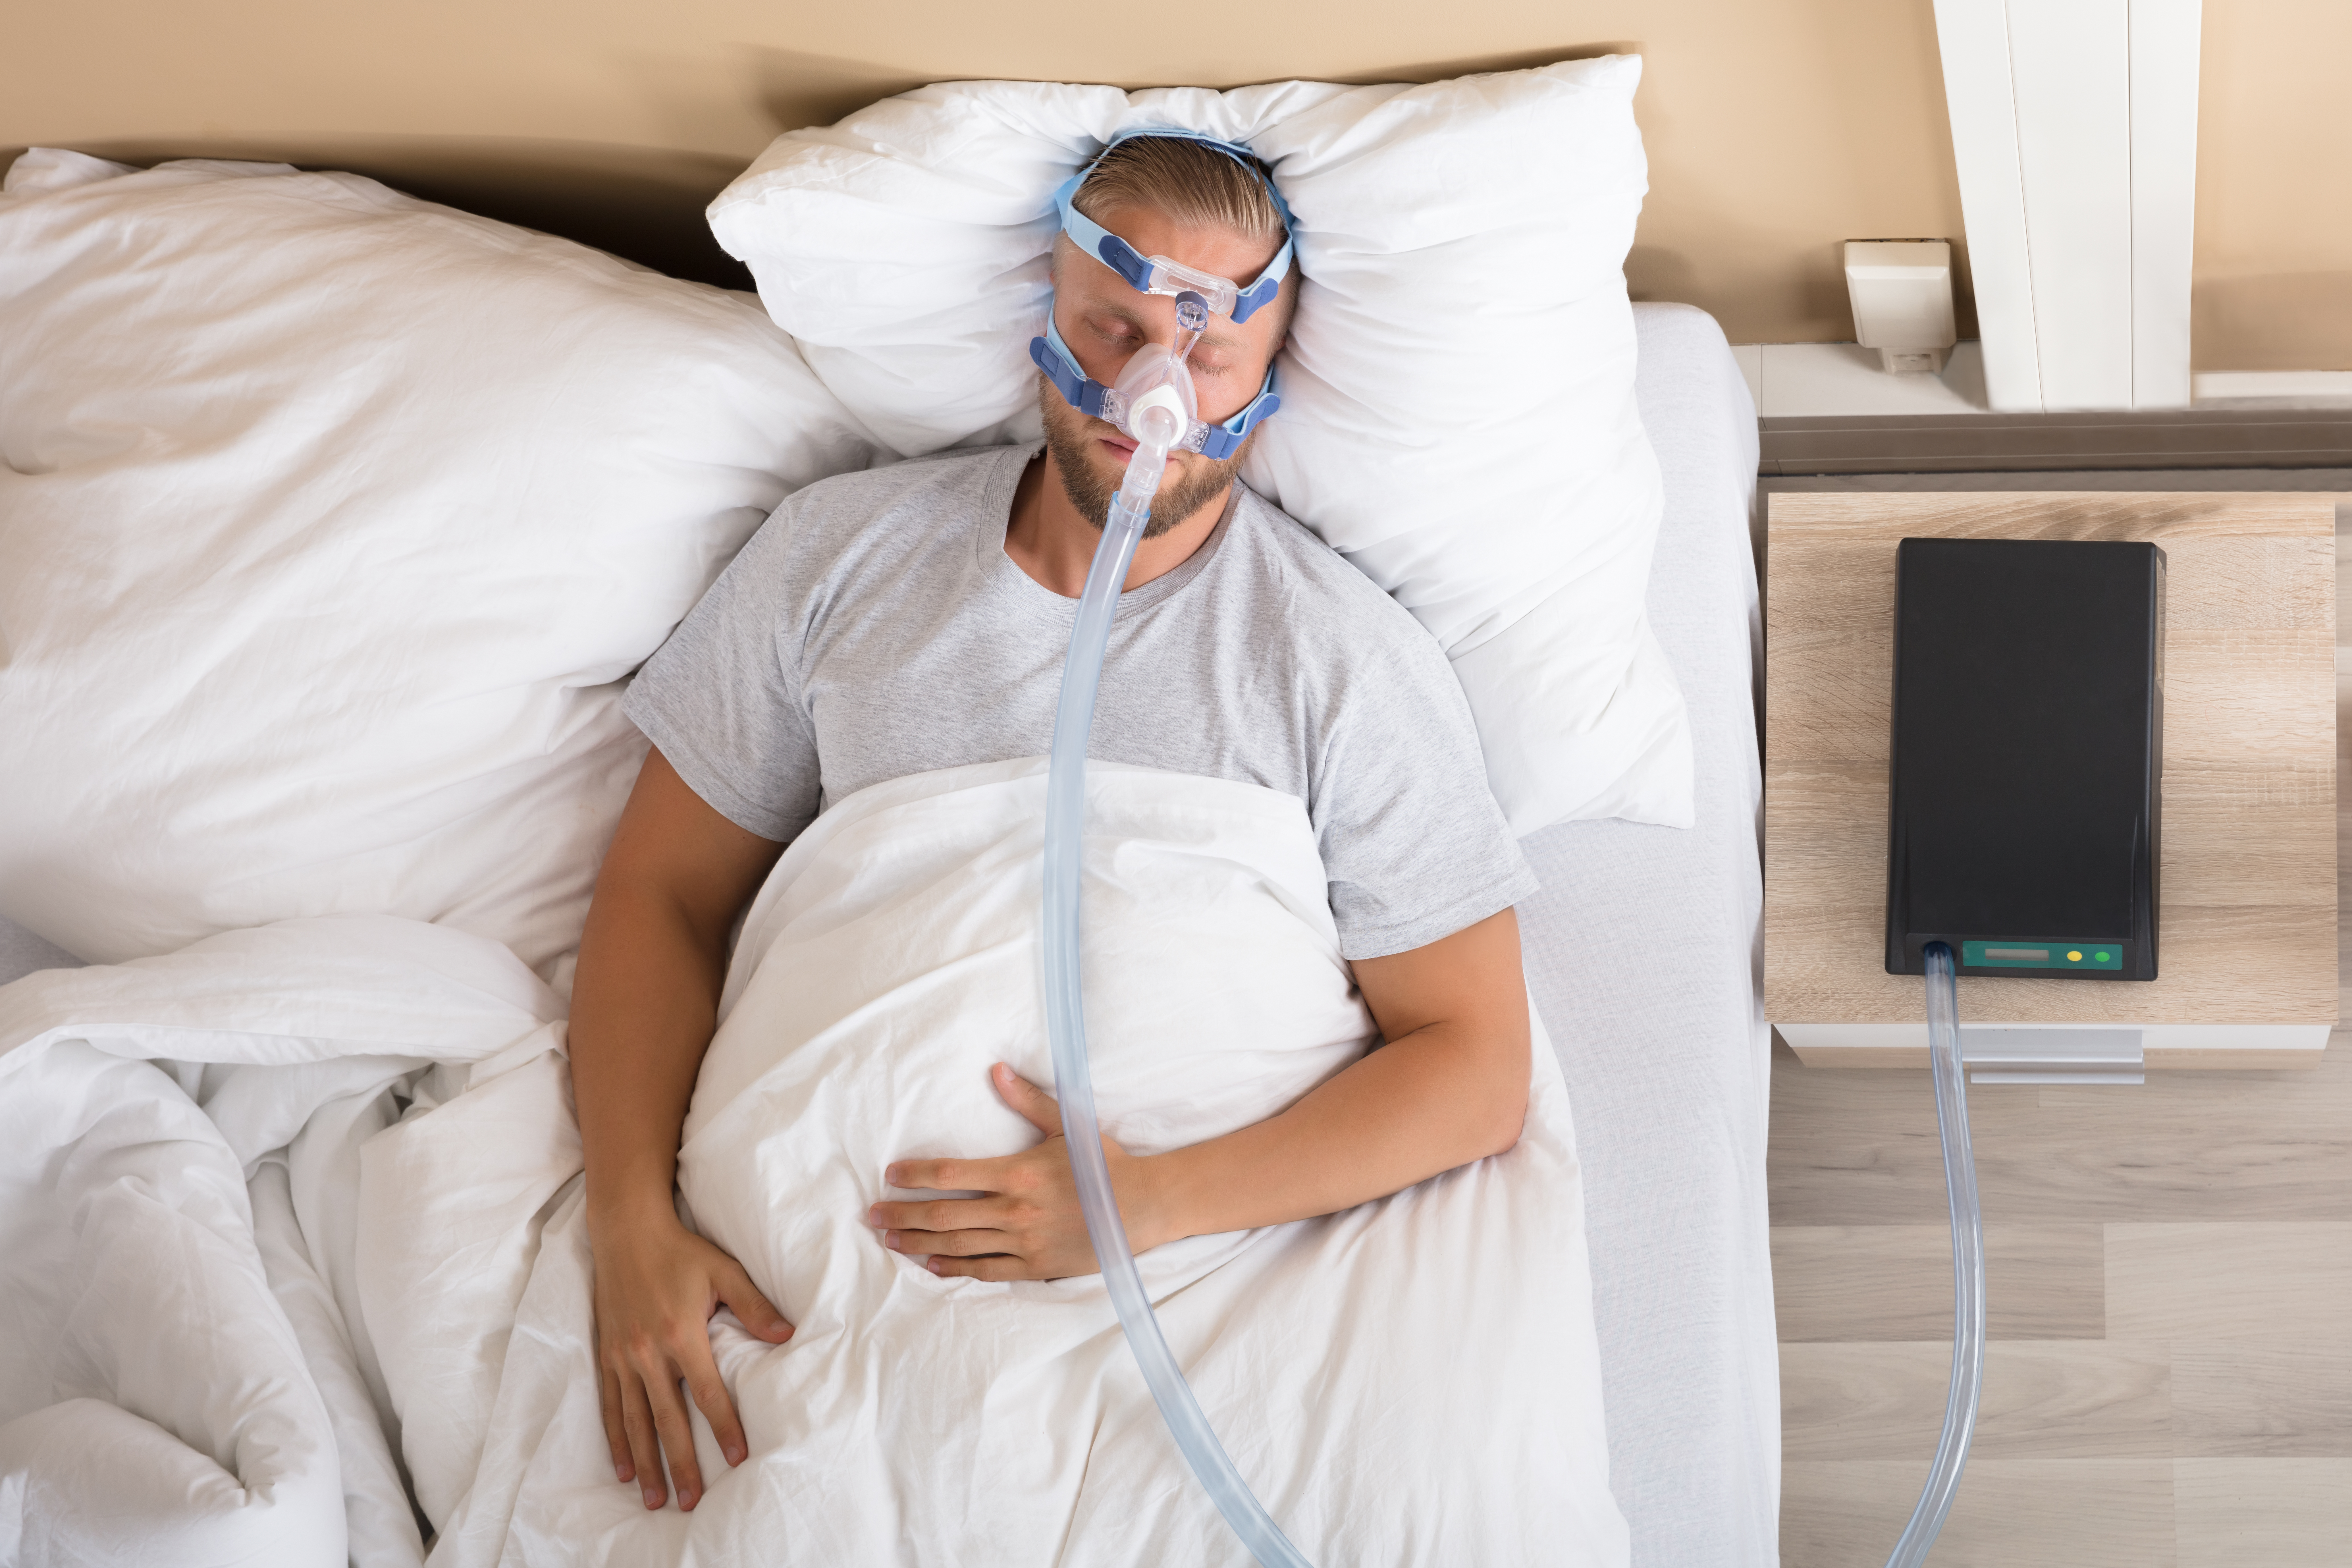 Man sleeping with CPAP device on face